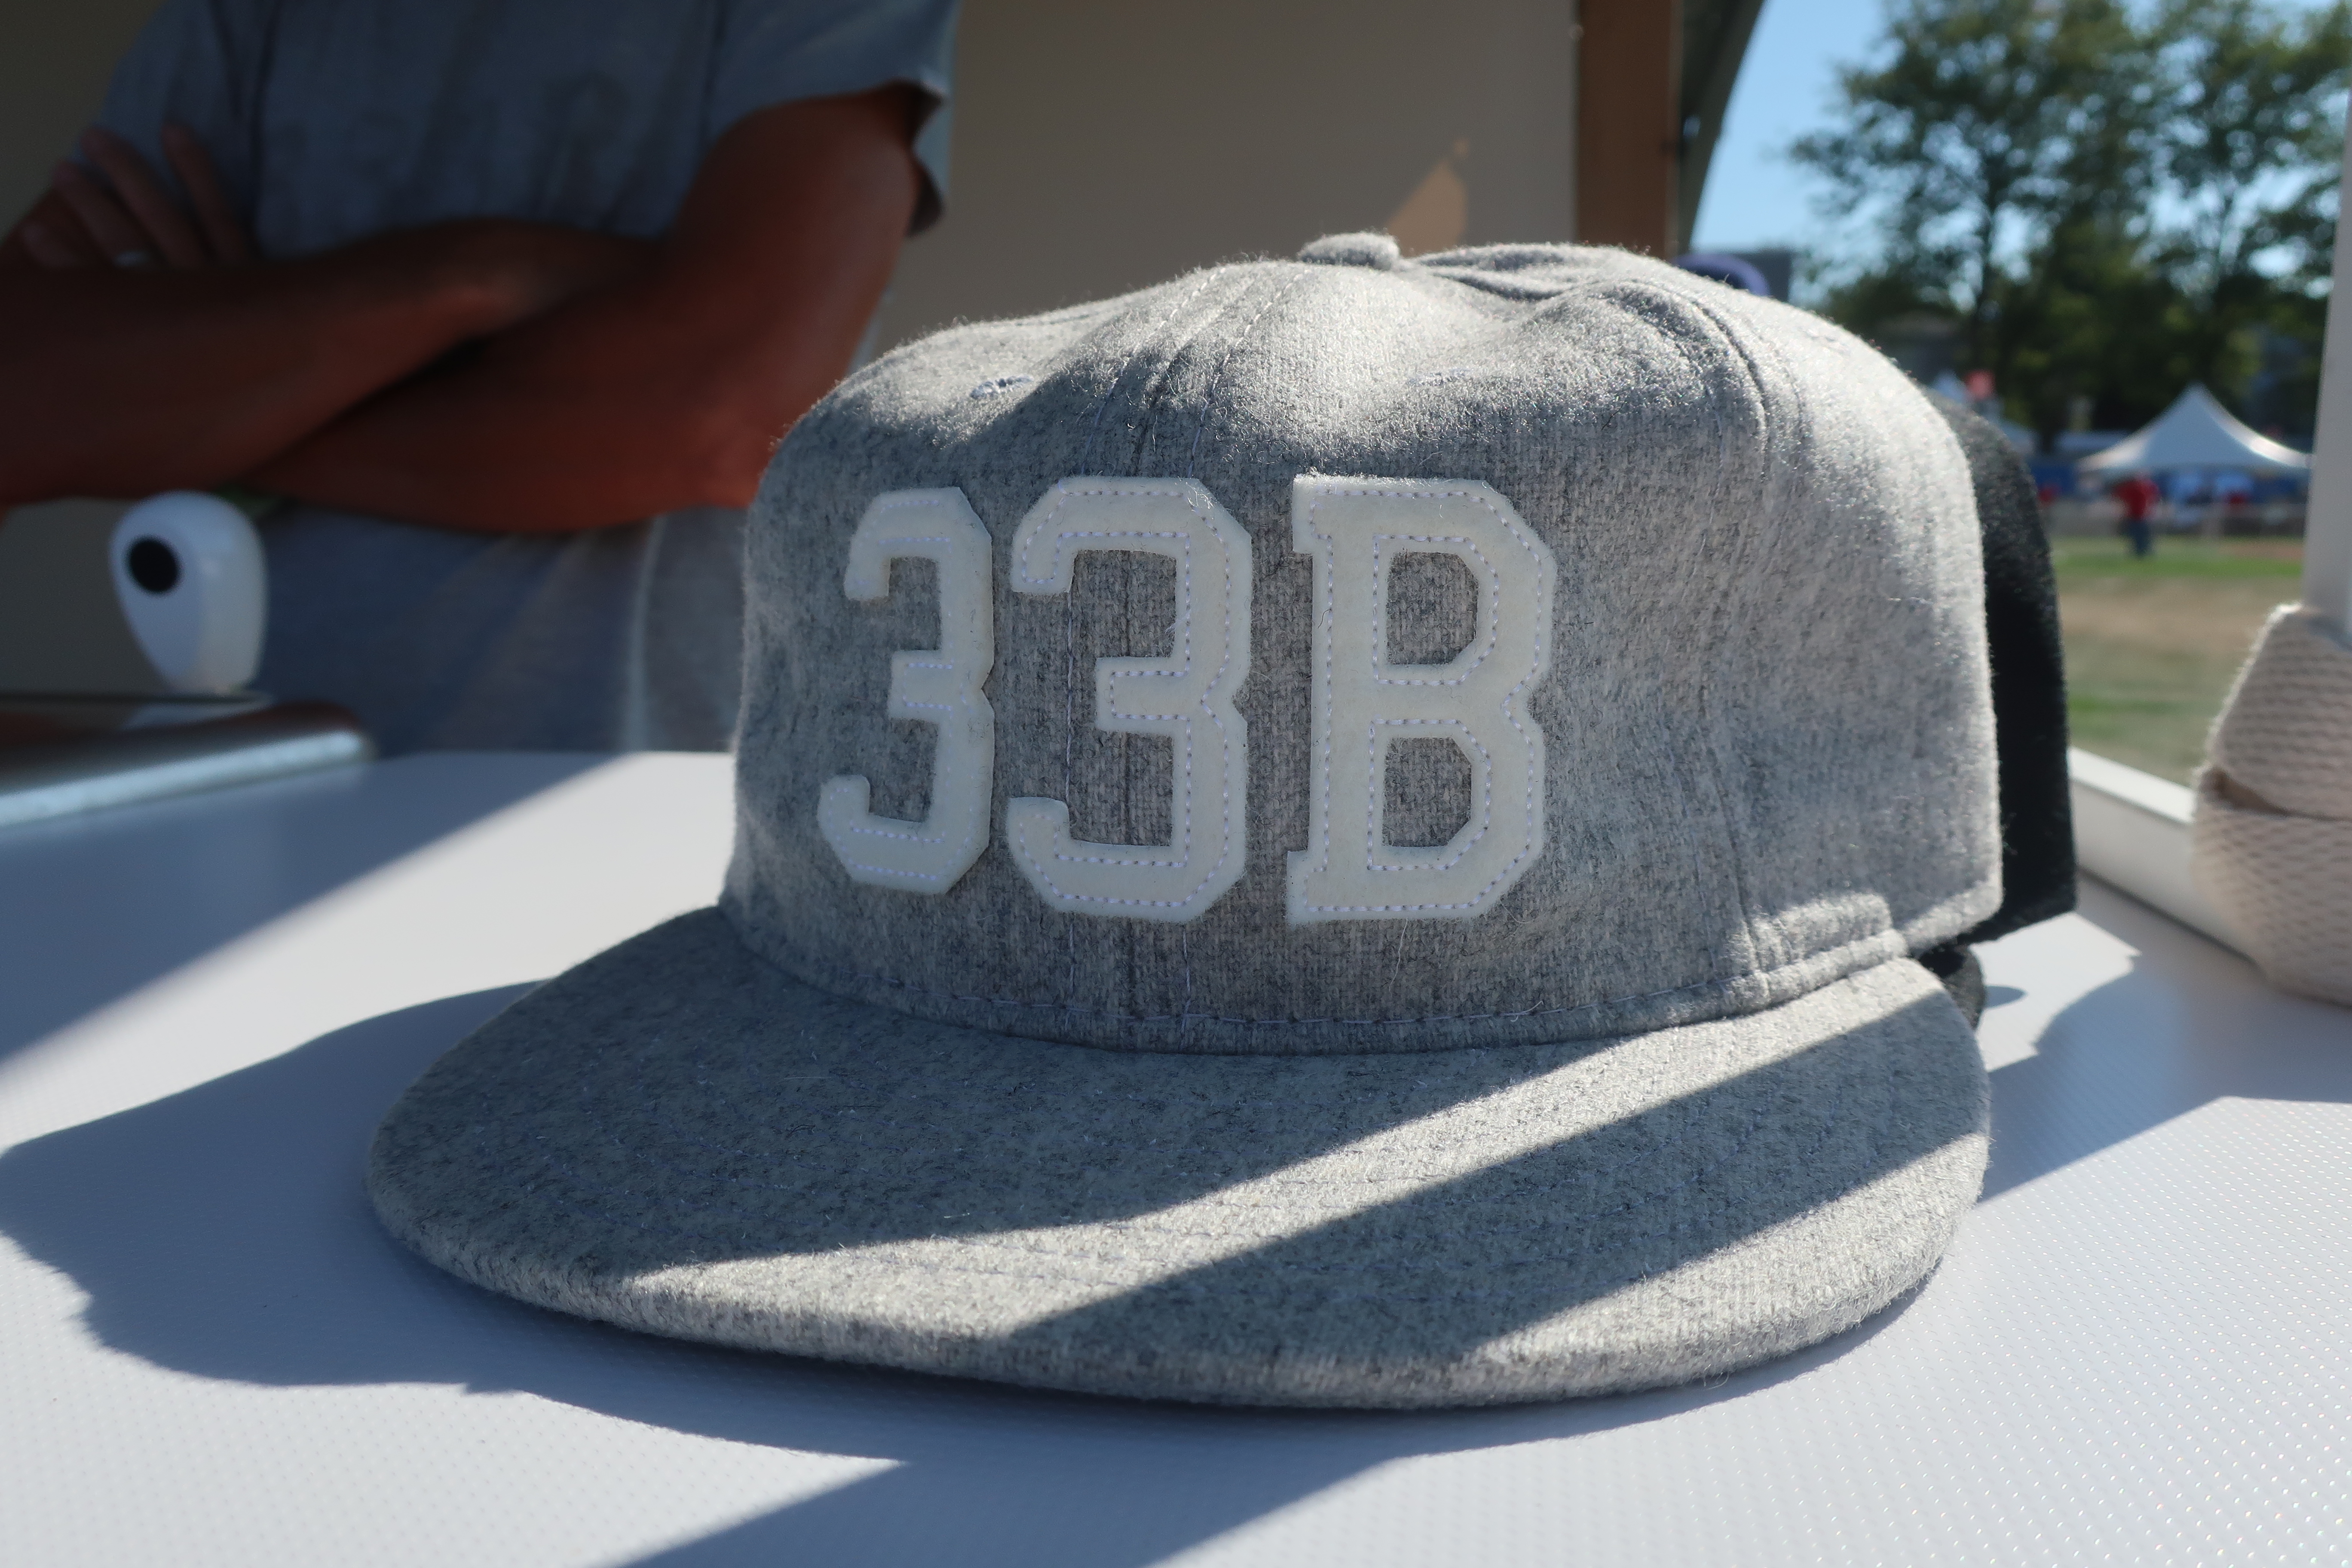 A hat from 33 Brewing Experiment, part of 33 Acres Brewing where Trever Bass is now brewing.